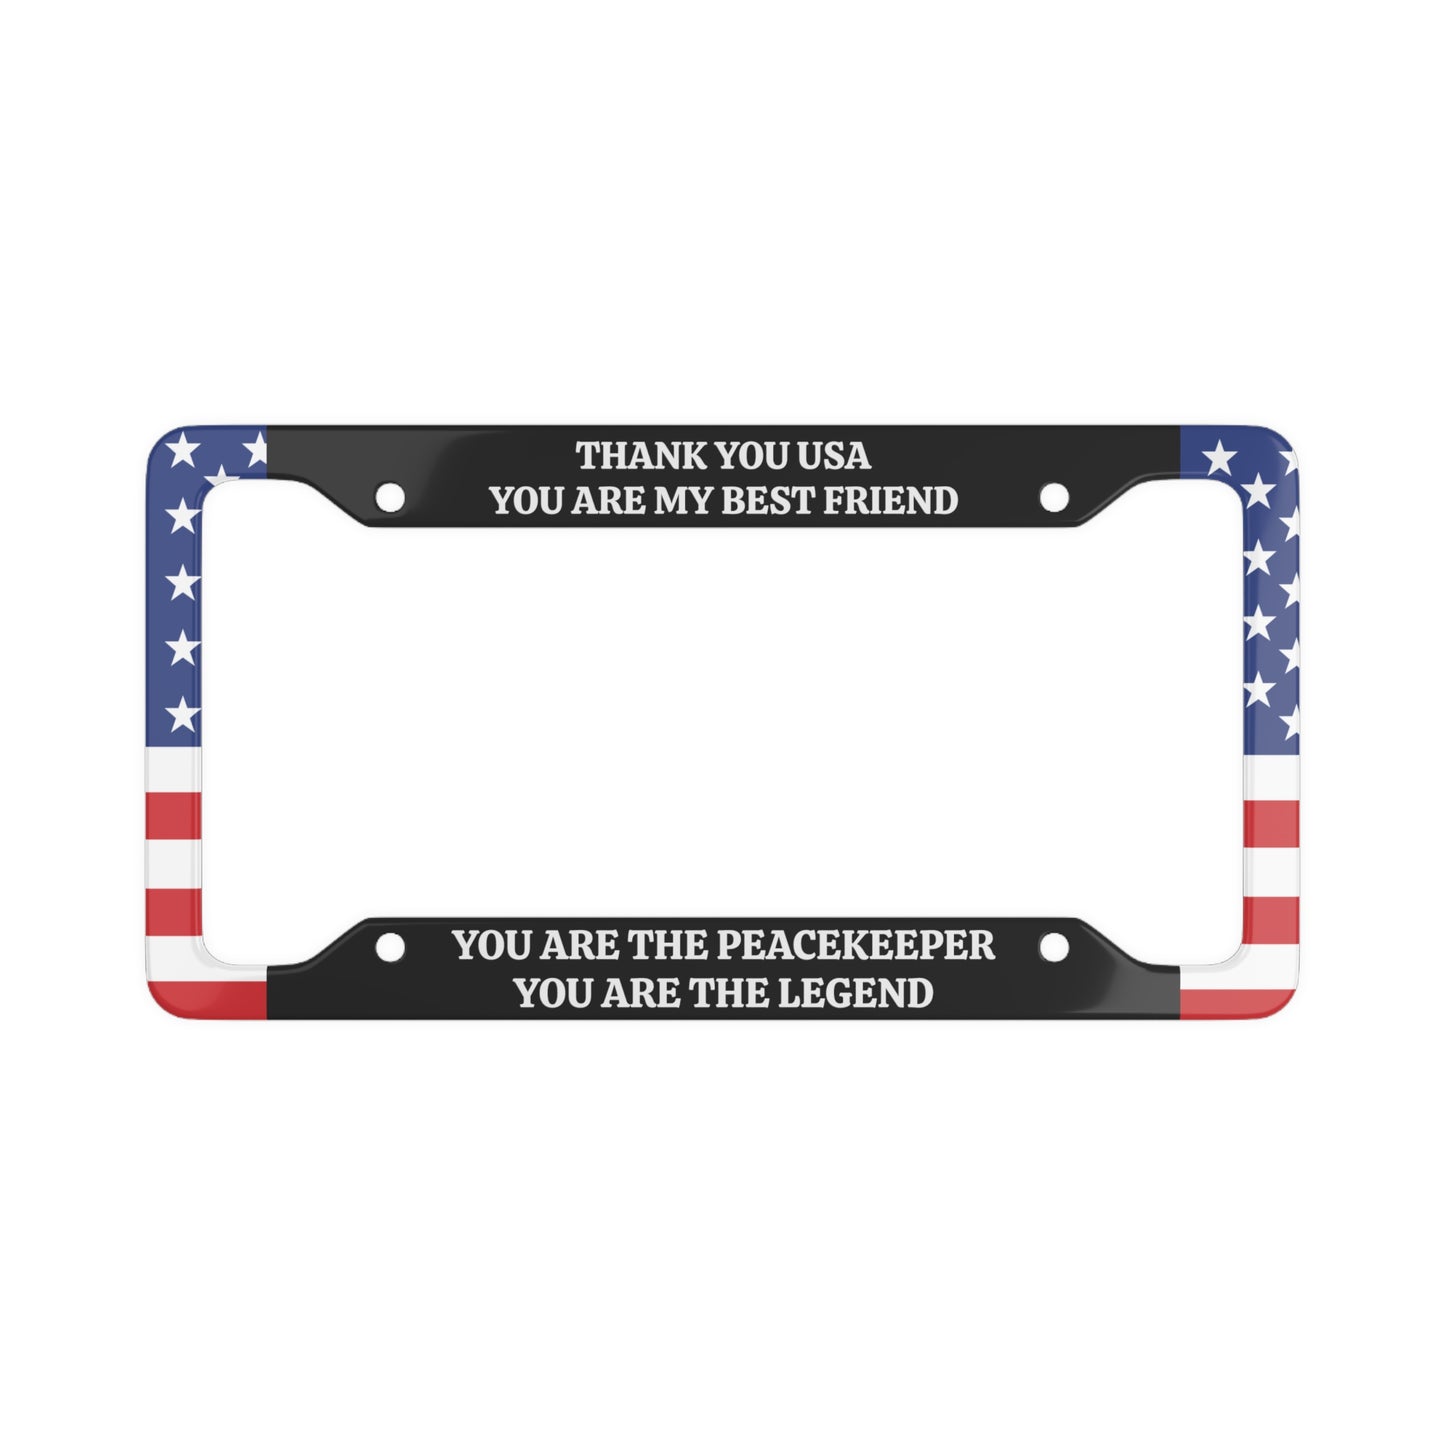 Thank you USA You are my best friend License Plate Frame